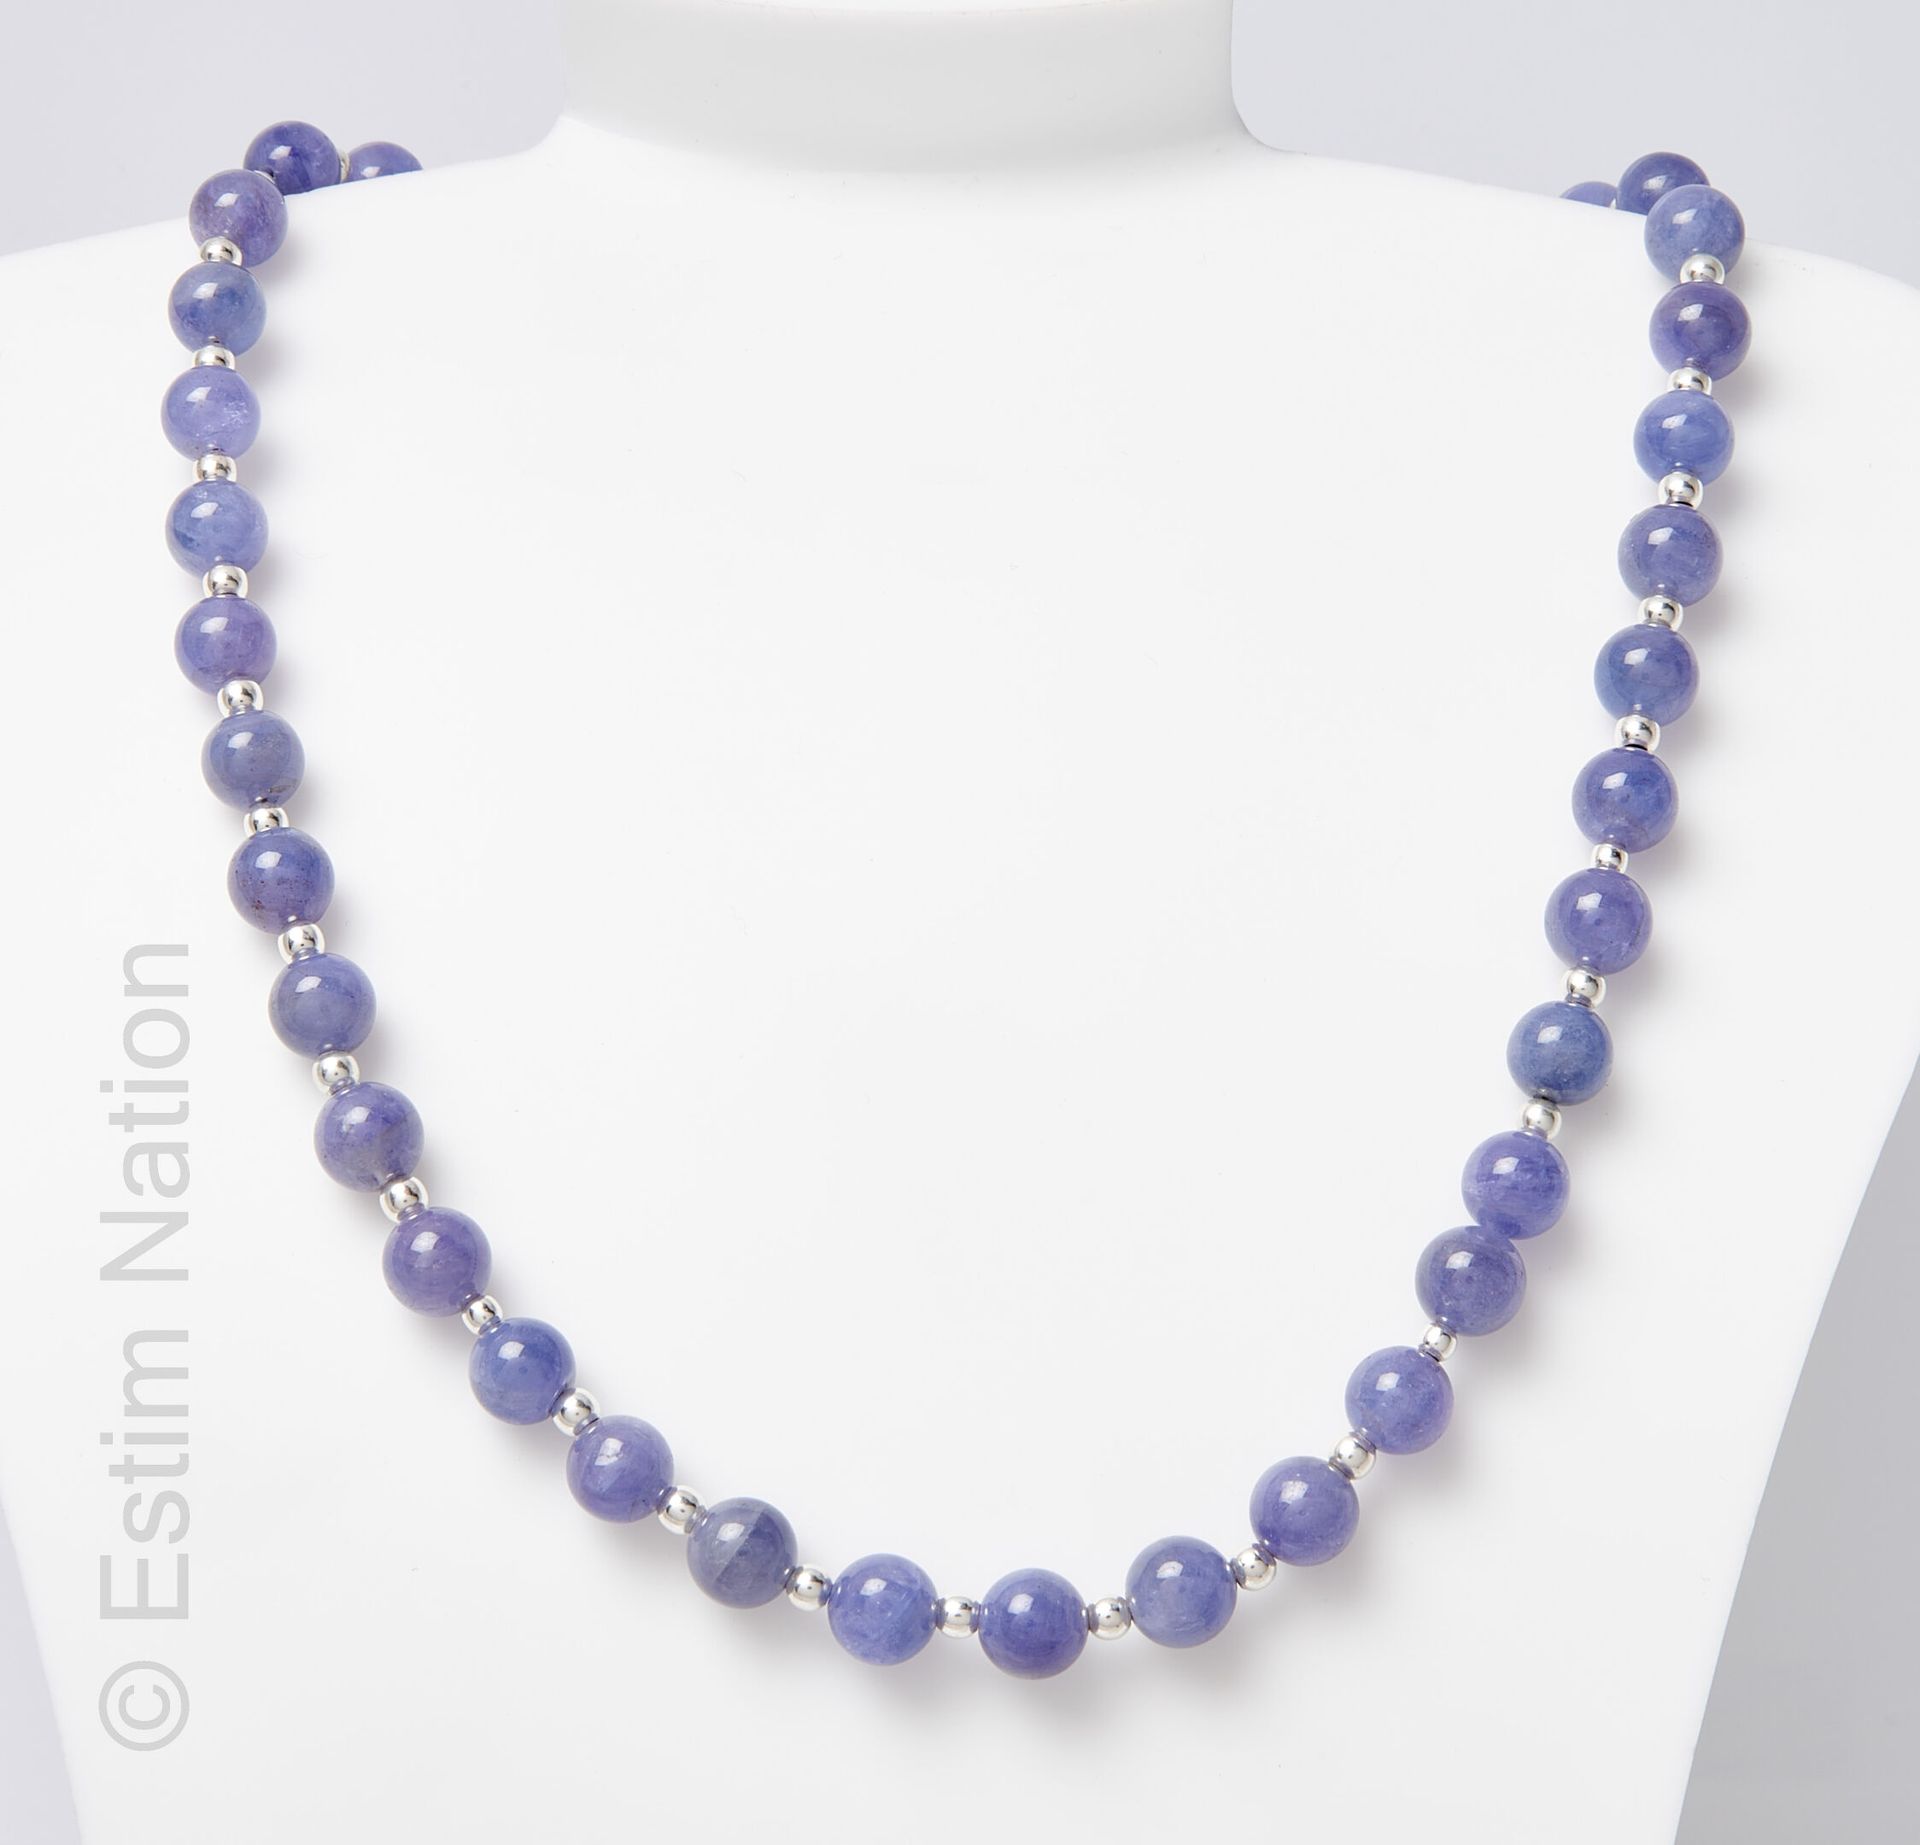 COLLIER TANZANITES Necklace made of tanzanite beads alternated with silver 925/°&hellip;